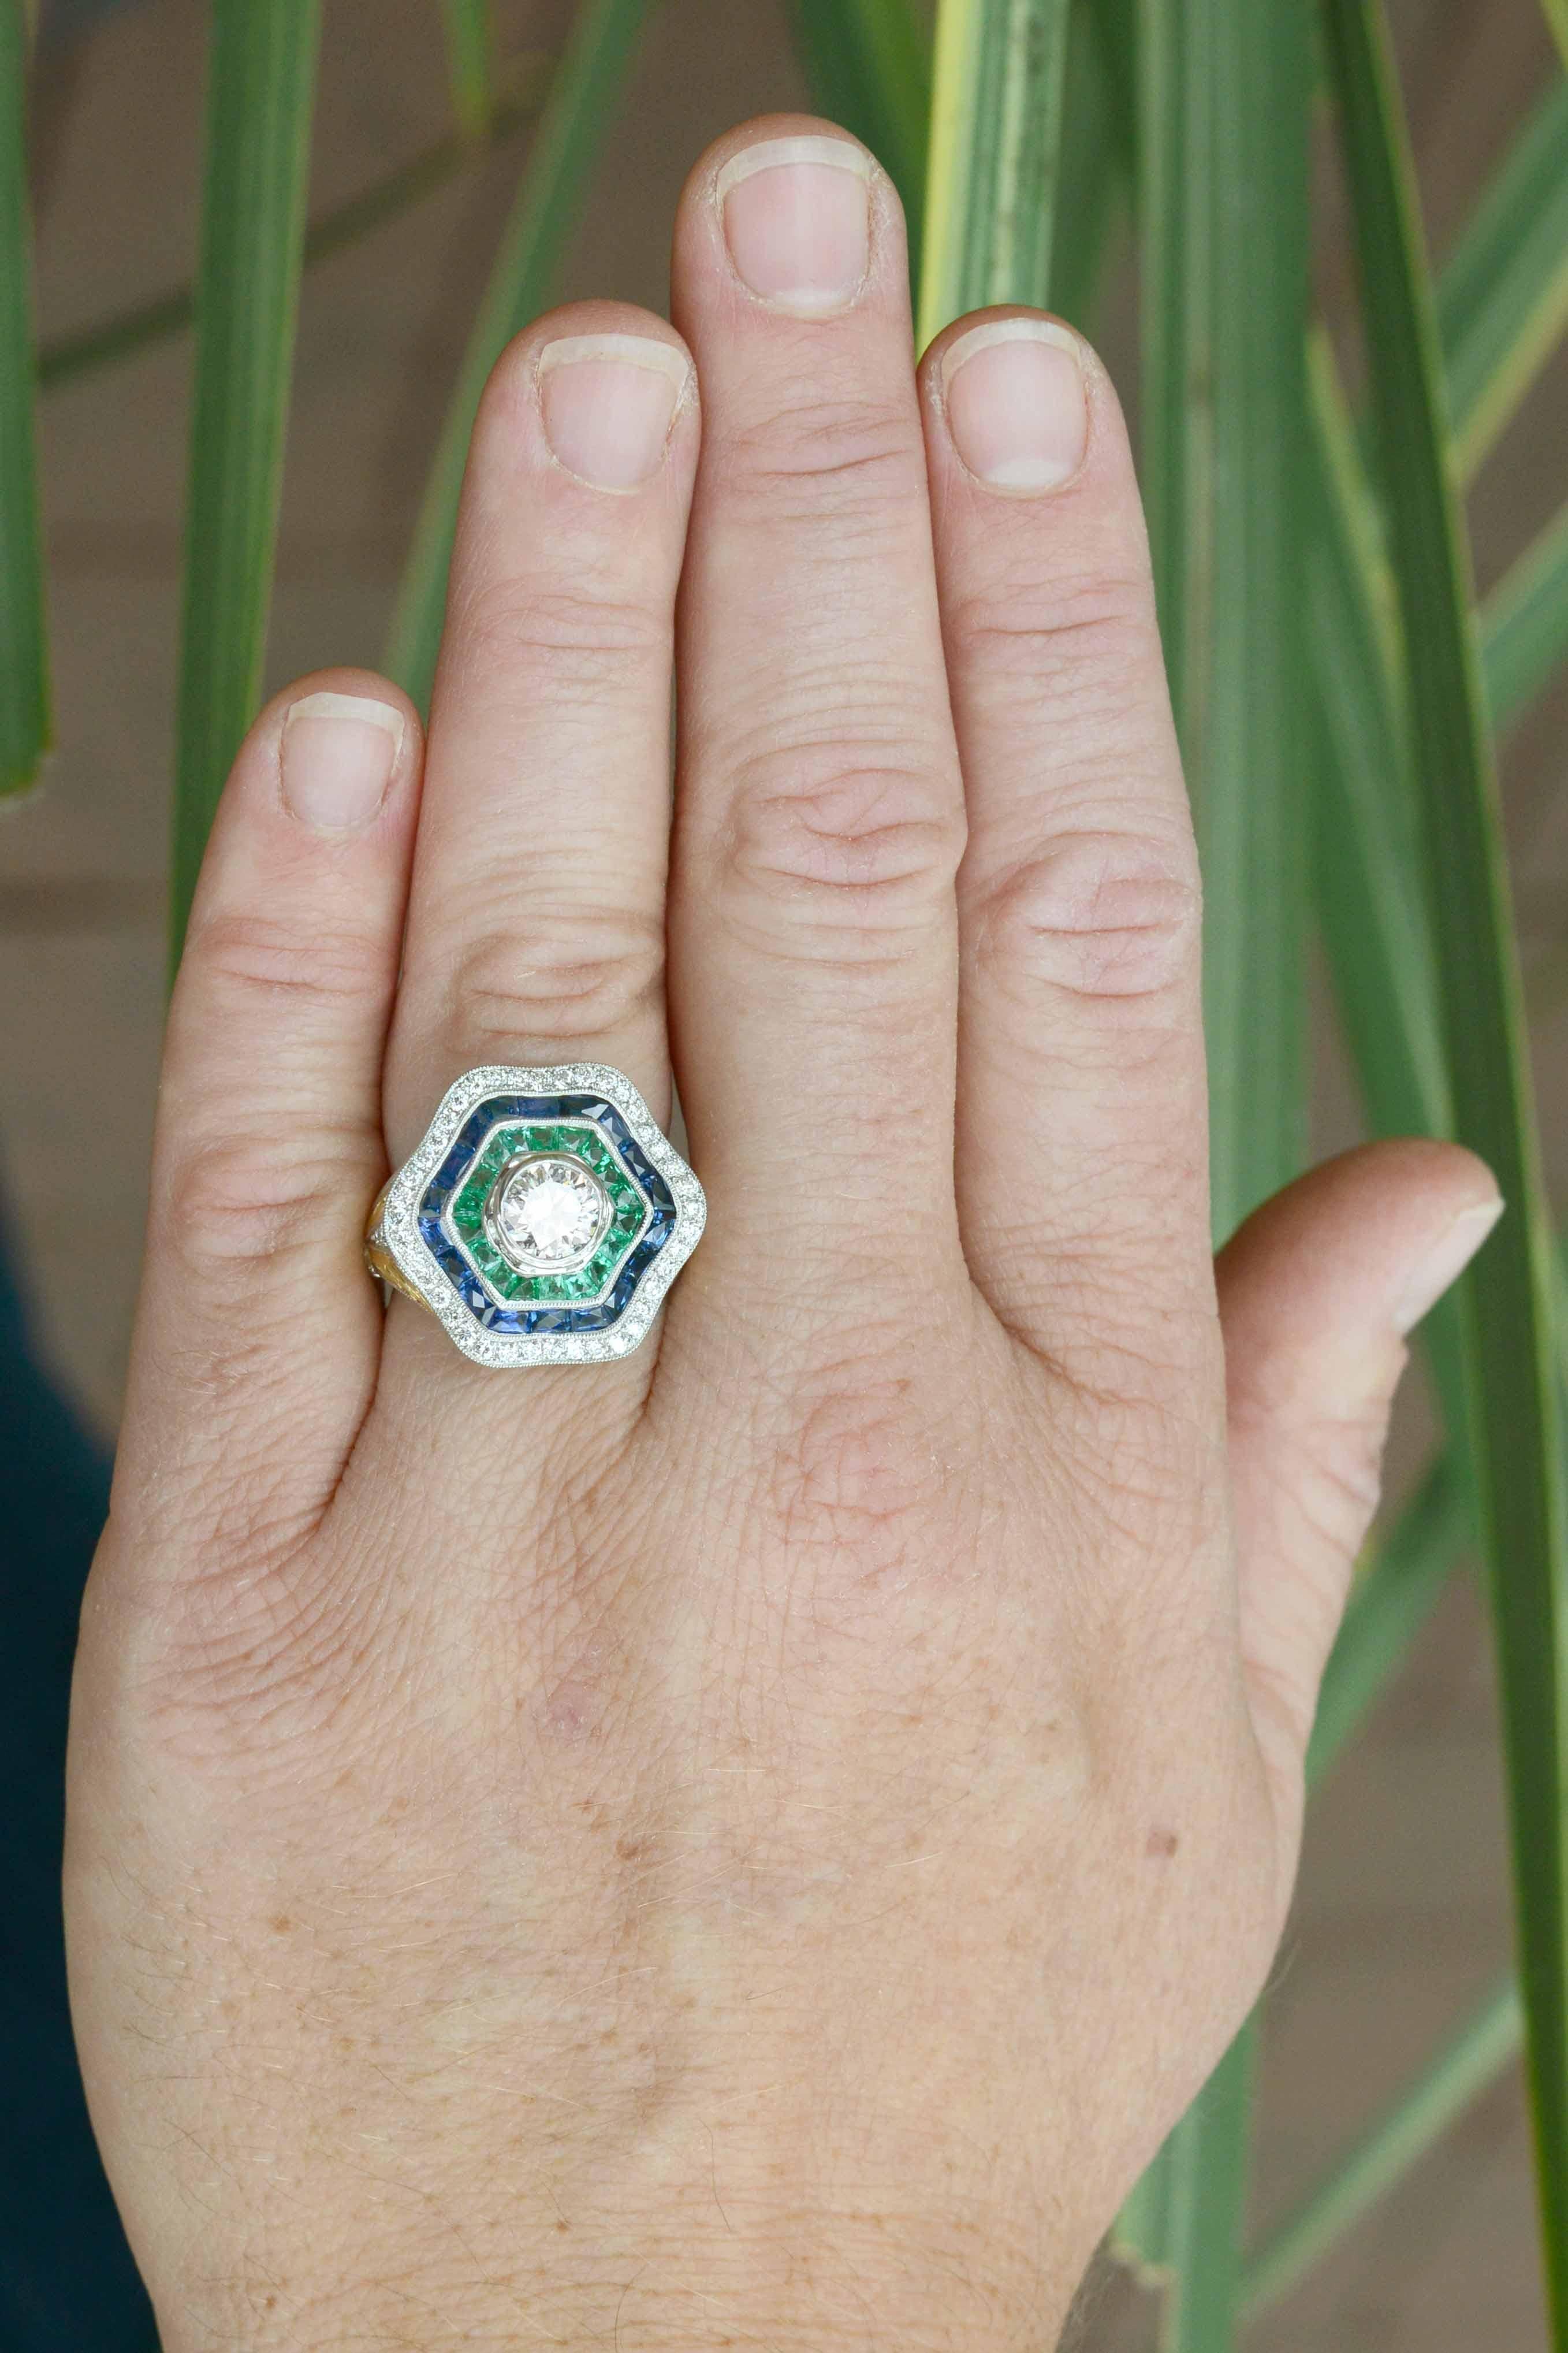 A dynamic Art Deco style diamond, sapphire and emerald ballerina ring. This dramatic cocktail ring is centered by a shimmering 1.02 carat round brilliant diamond bursting with fire. The undulating waves of calibre' and French cut gemstones resemble